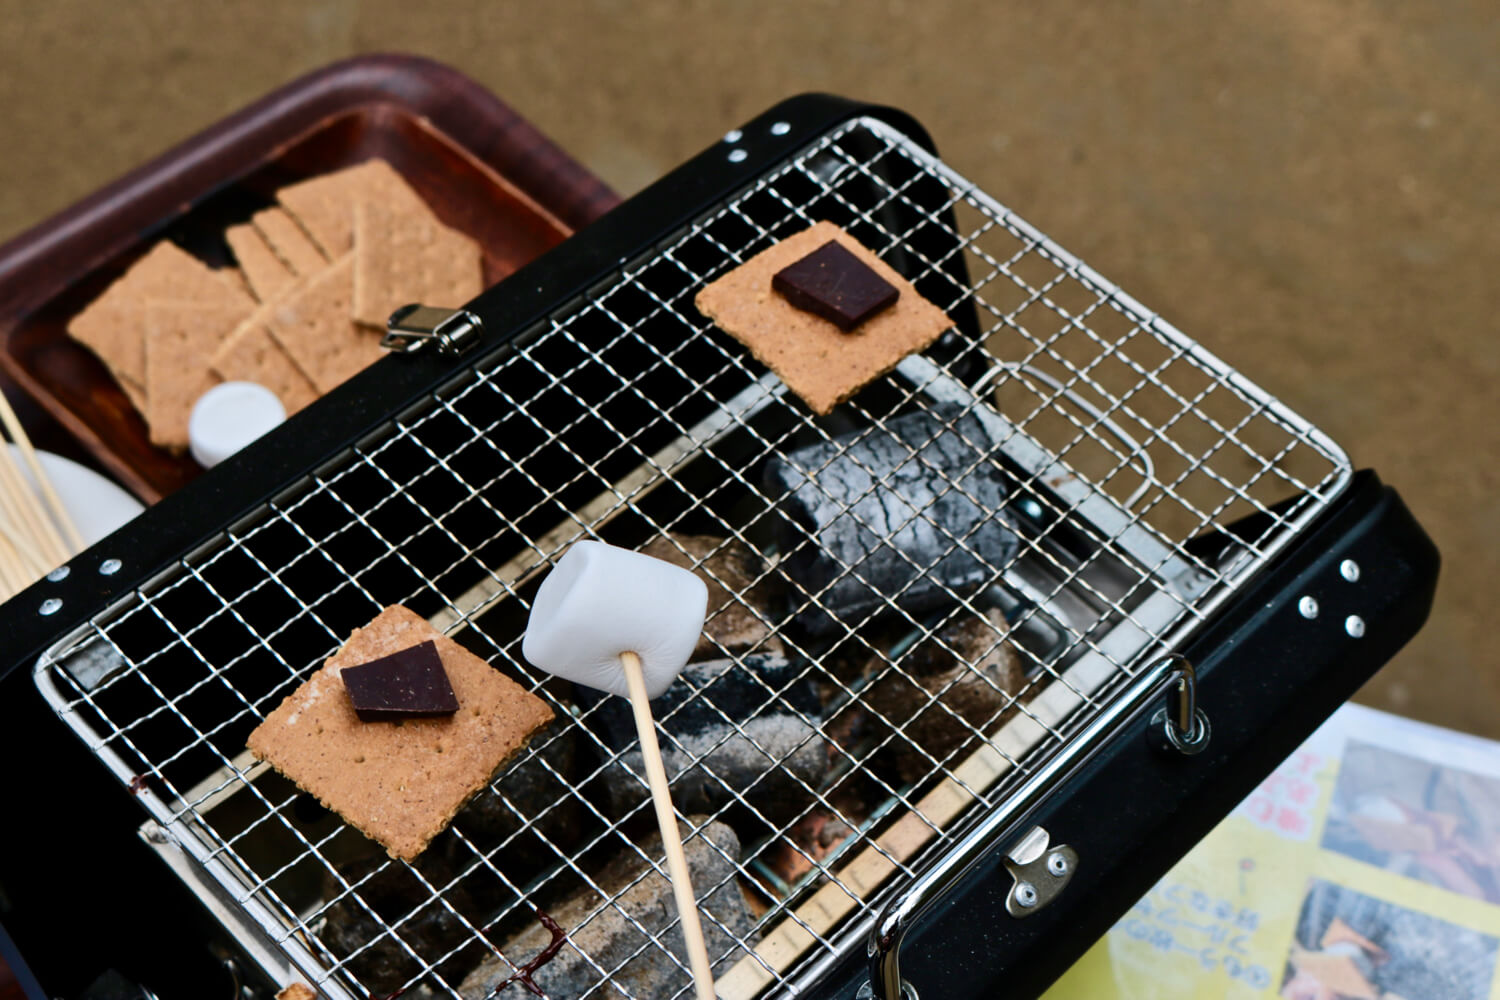 Making S'mores